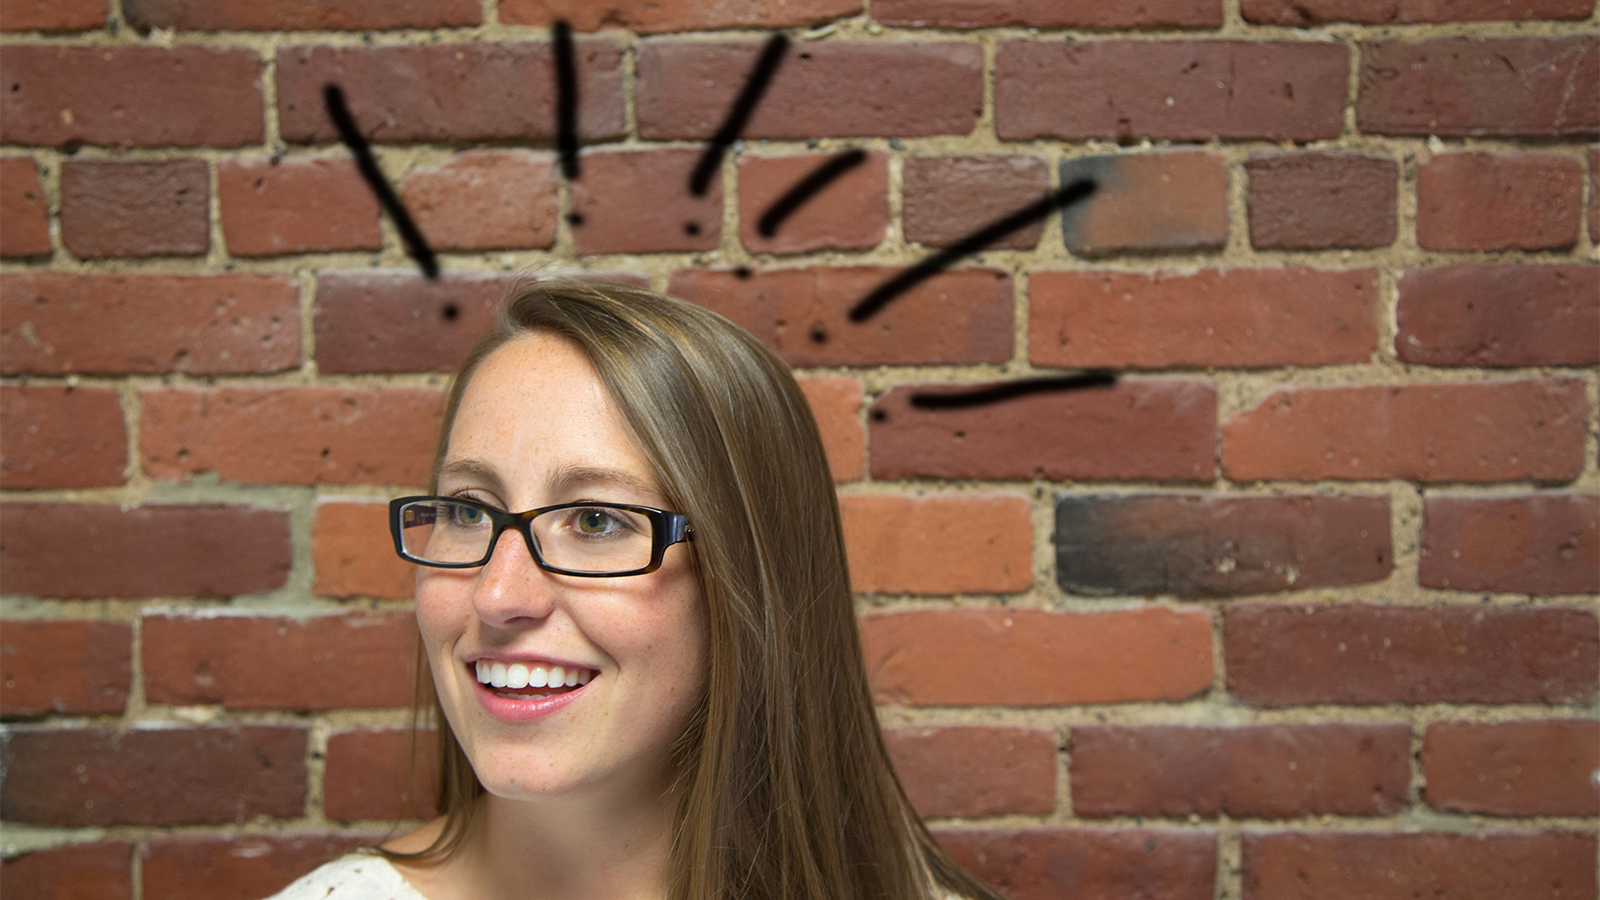 girl smiling with exclamation points above her head, she stands in front of a brick wall